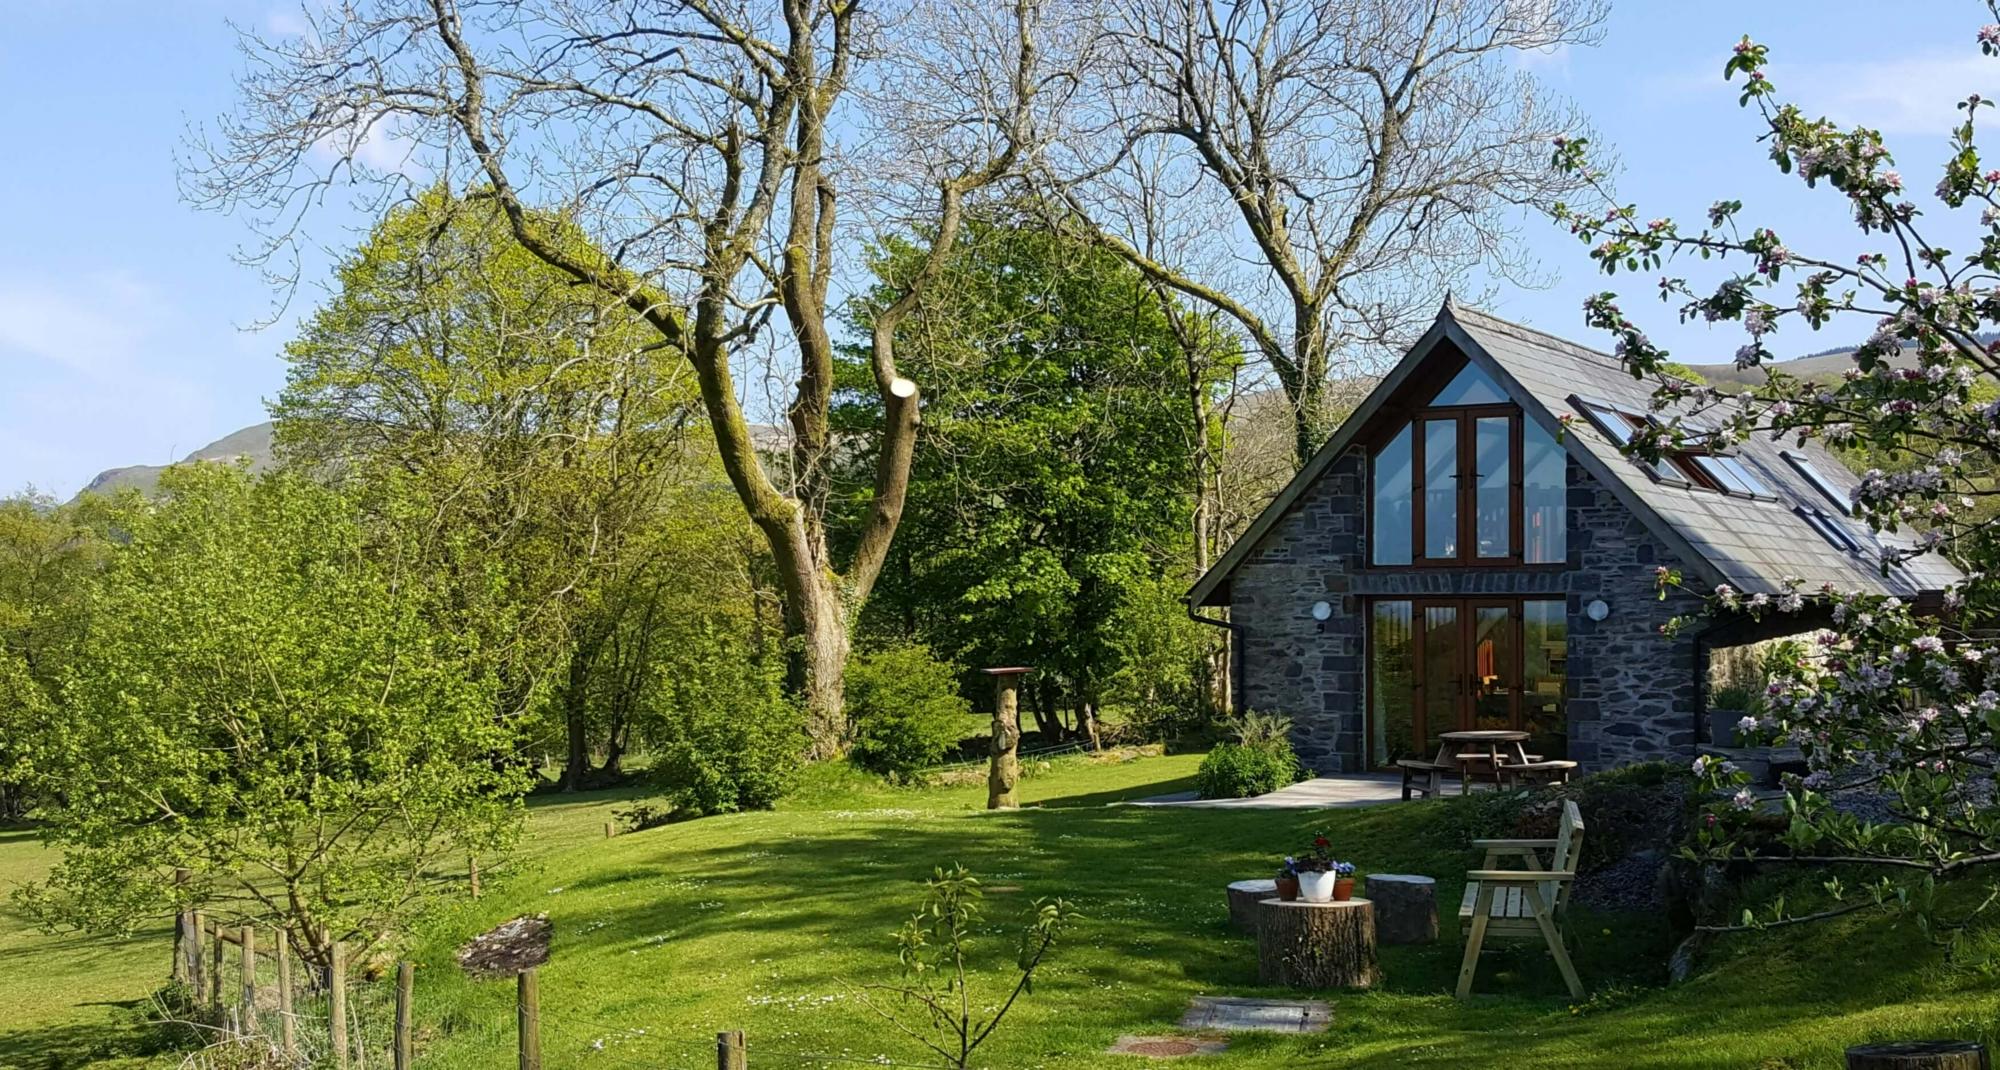 Dog Friendly Holiday Cottages in Wales I Cool Places